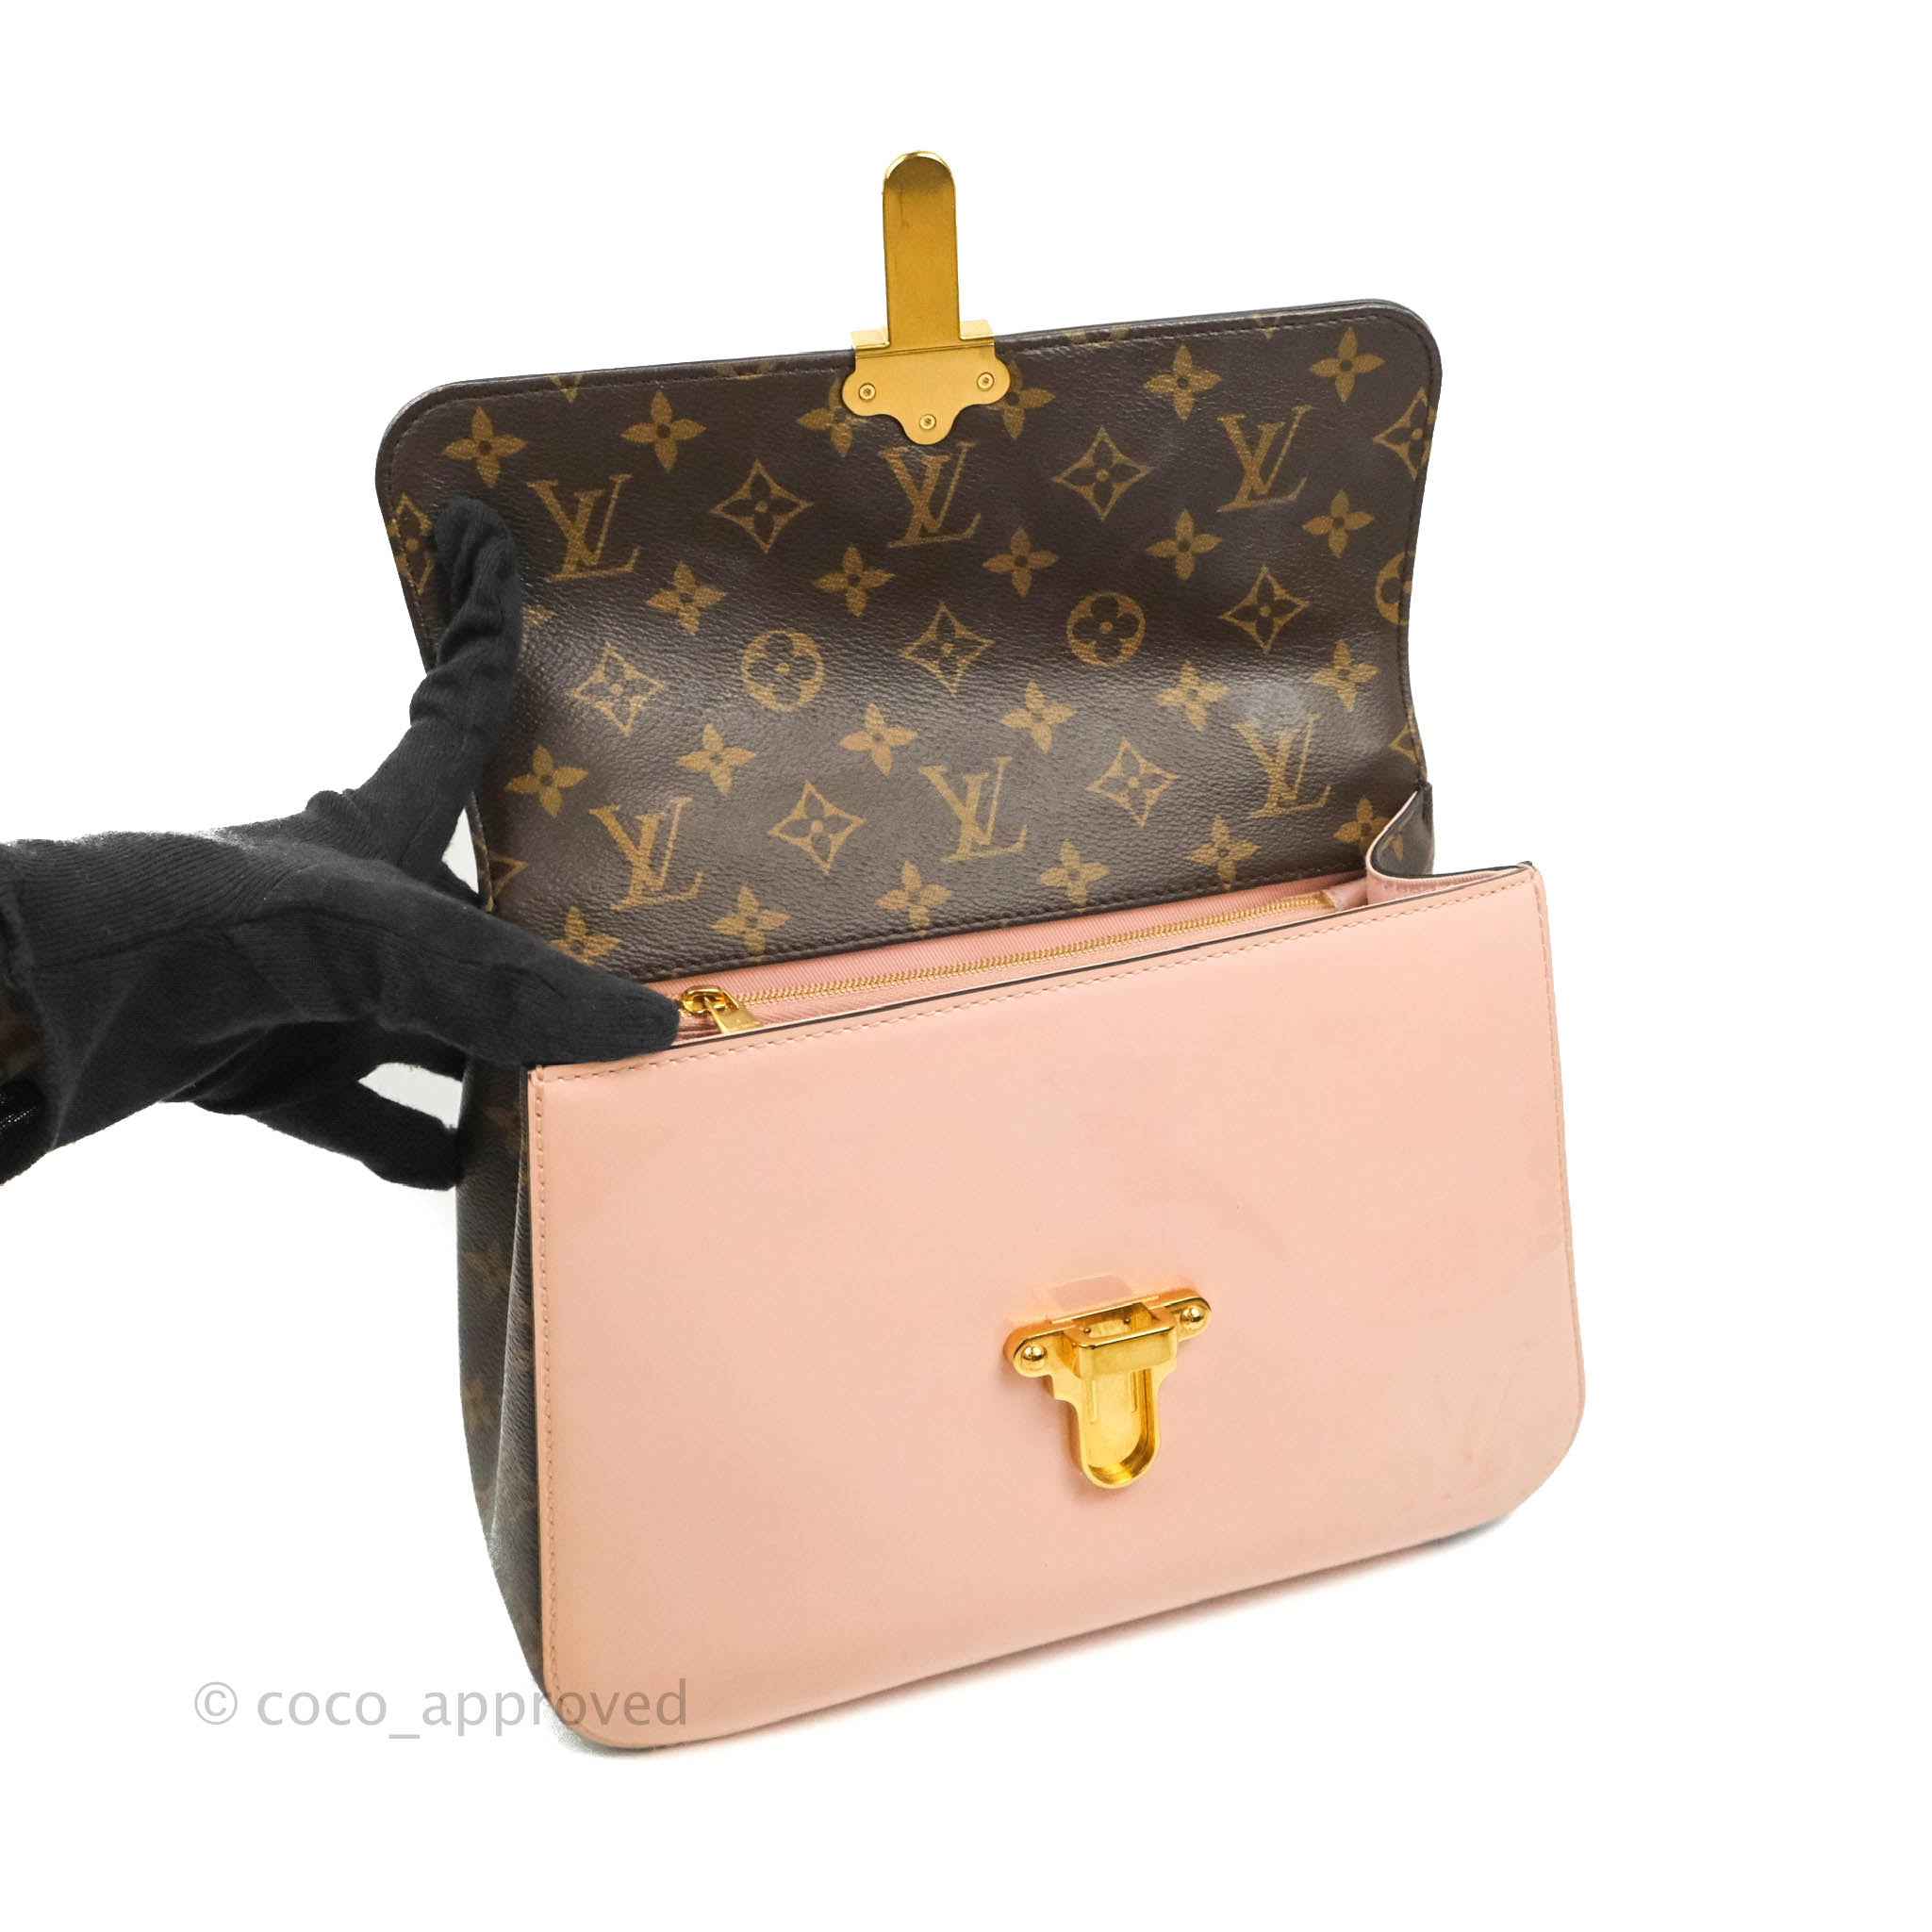 Louis Vuitton LV Women Cherrywood PM Handbag in Glossy Patent Leather -  LULUX